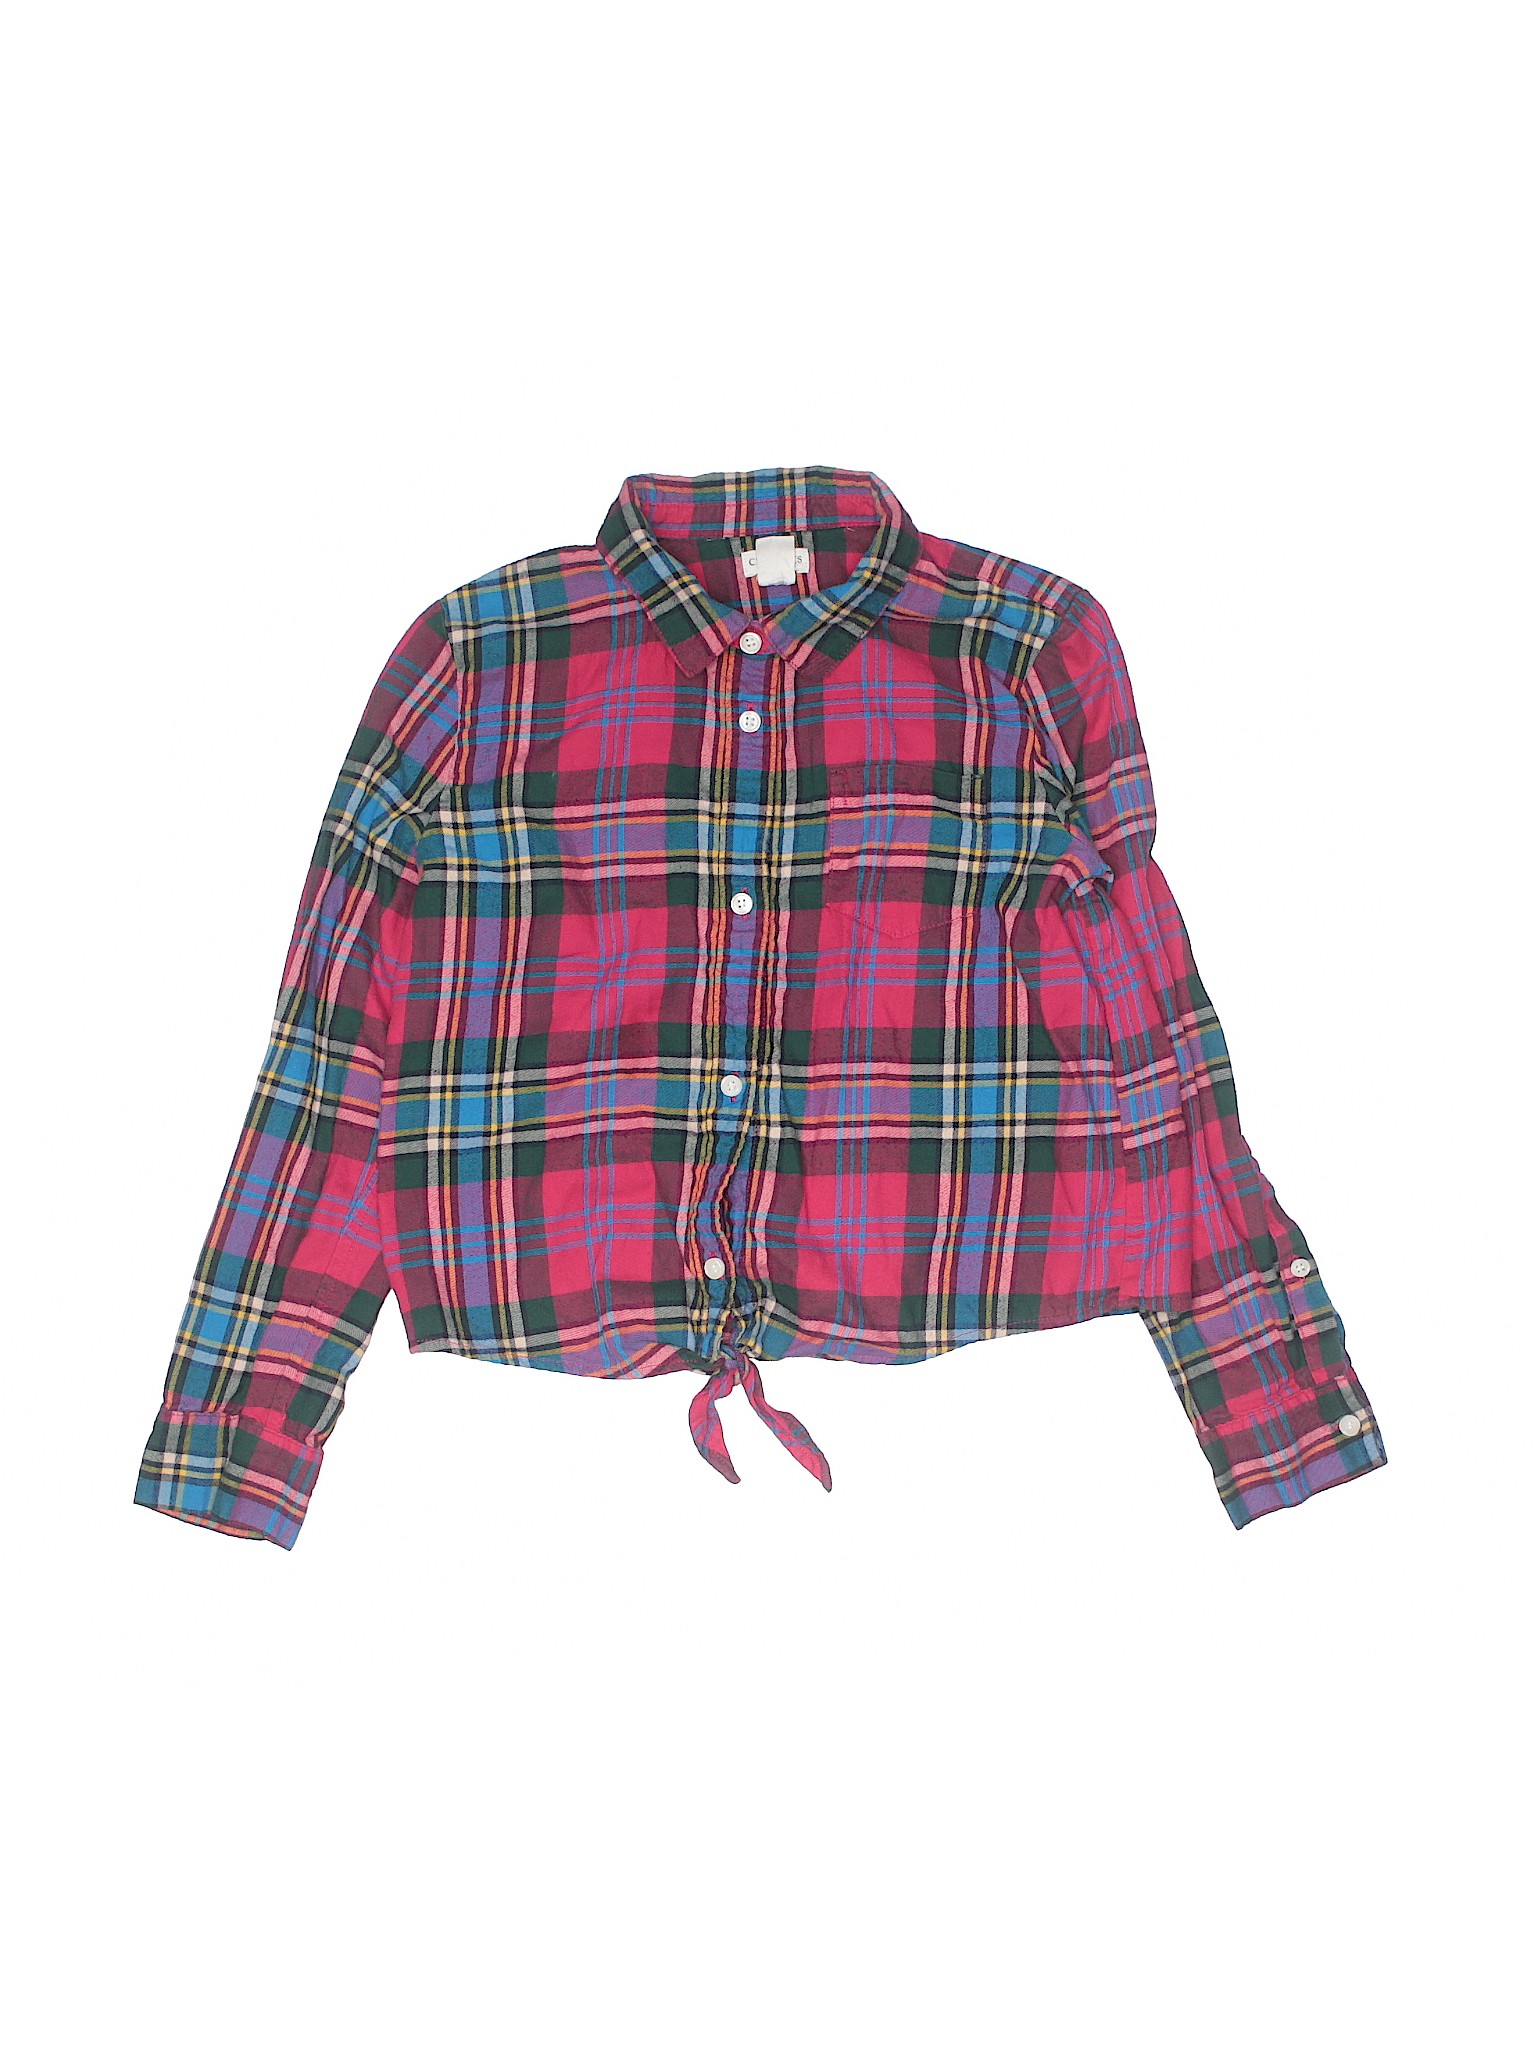 Crewcuts Outlet Girls Red Long Sleeve Button-Down Shirt 10 | eBay